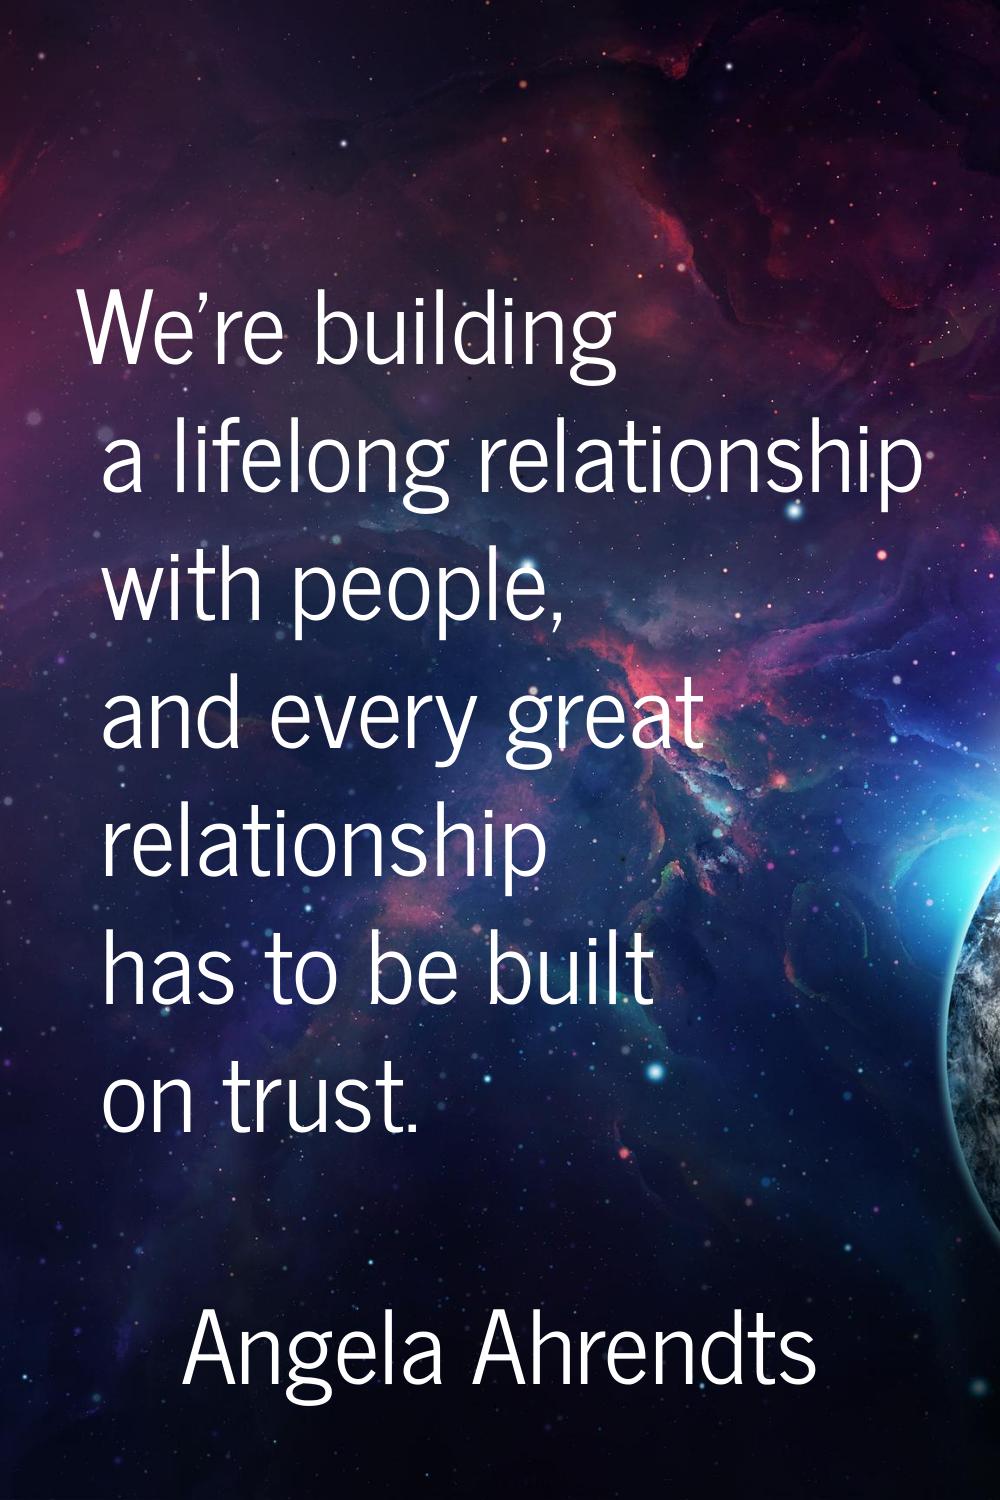 We're building a lifelong relationship with people, and every great relationship has to be built on